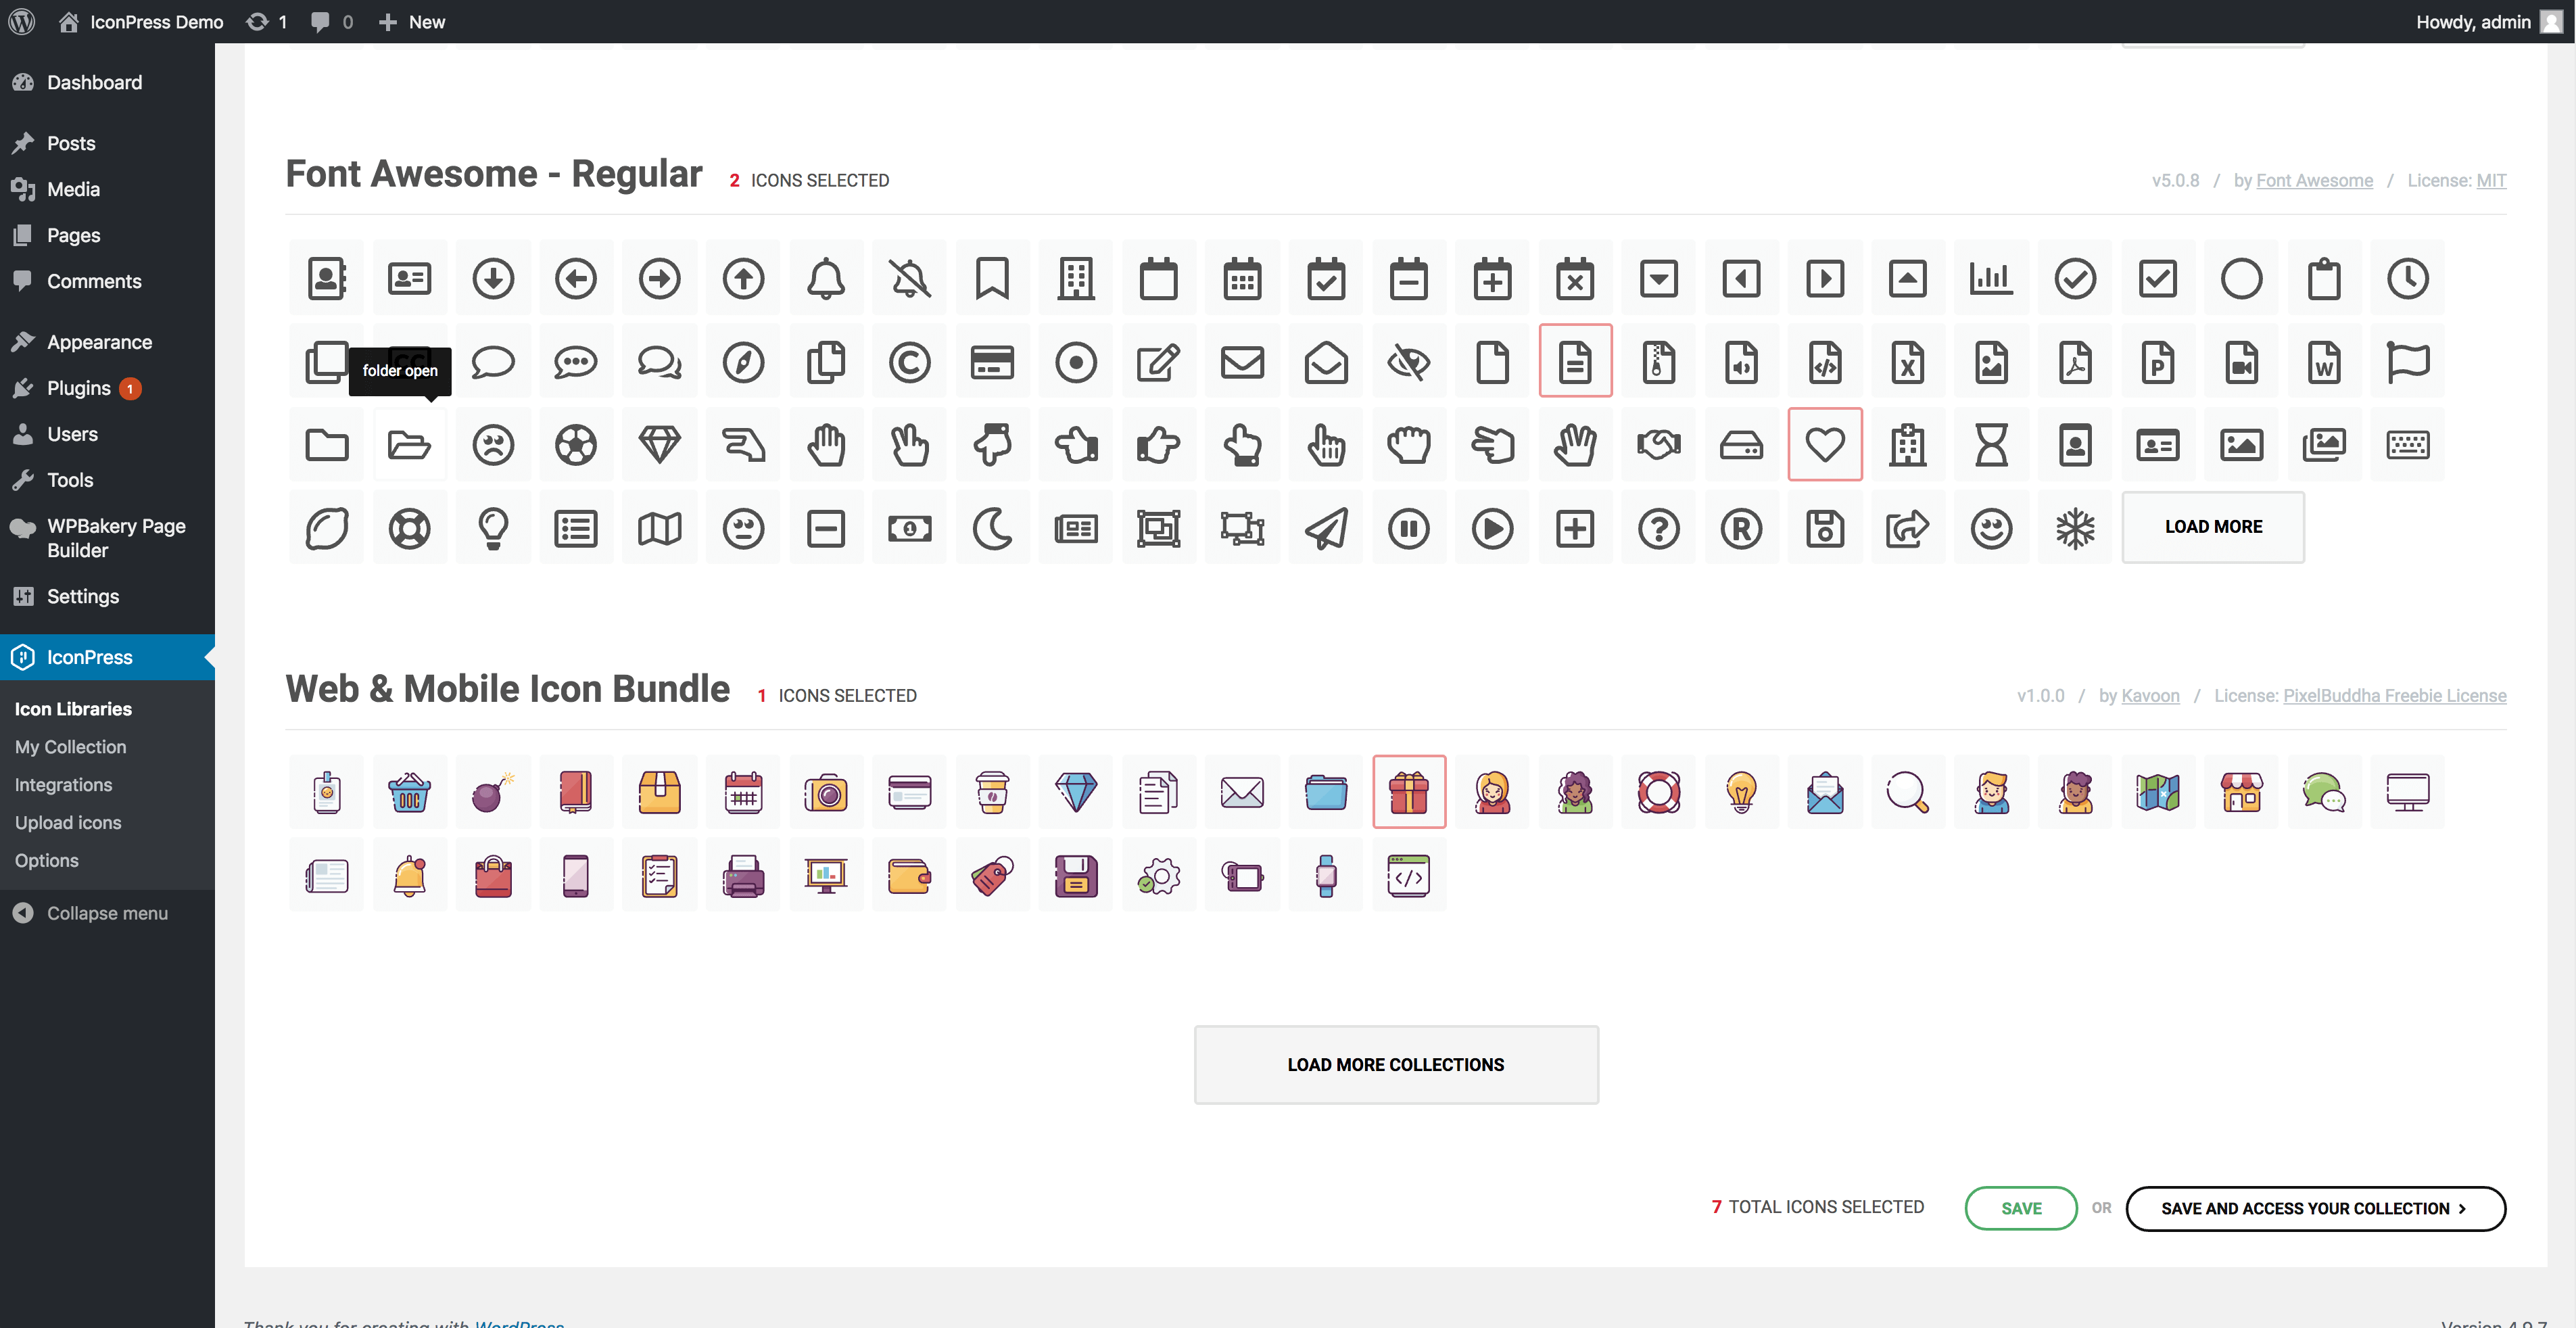 Upload icons (PRO Feature)